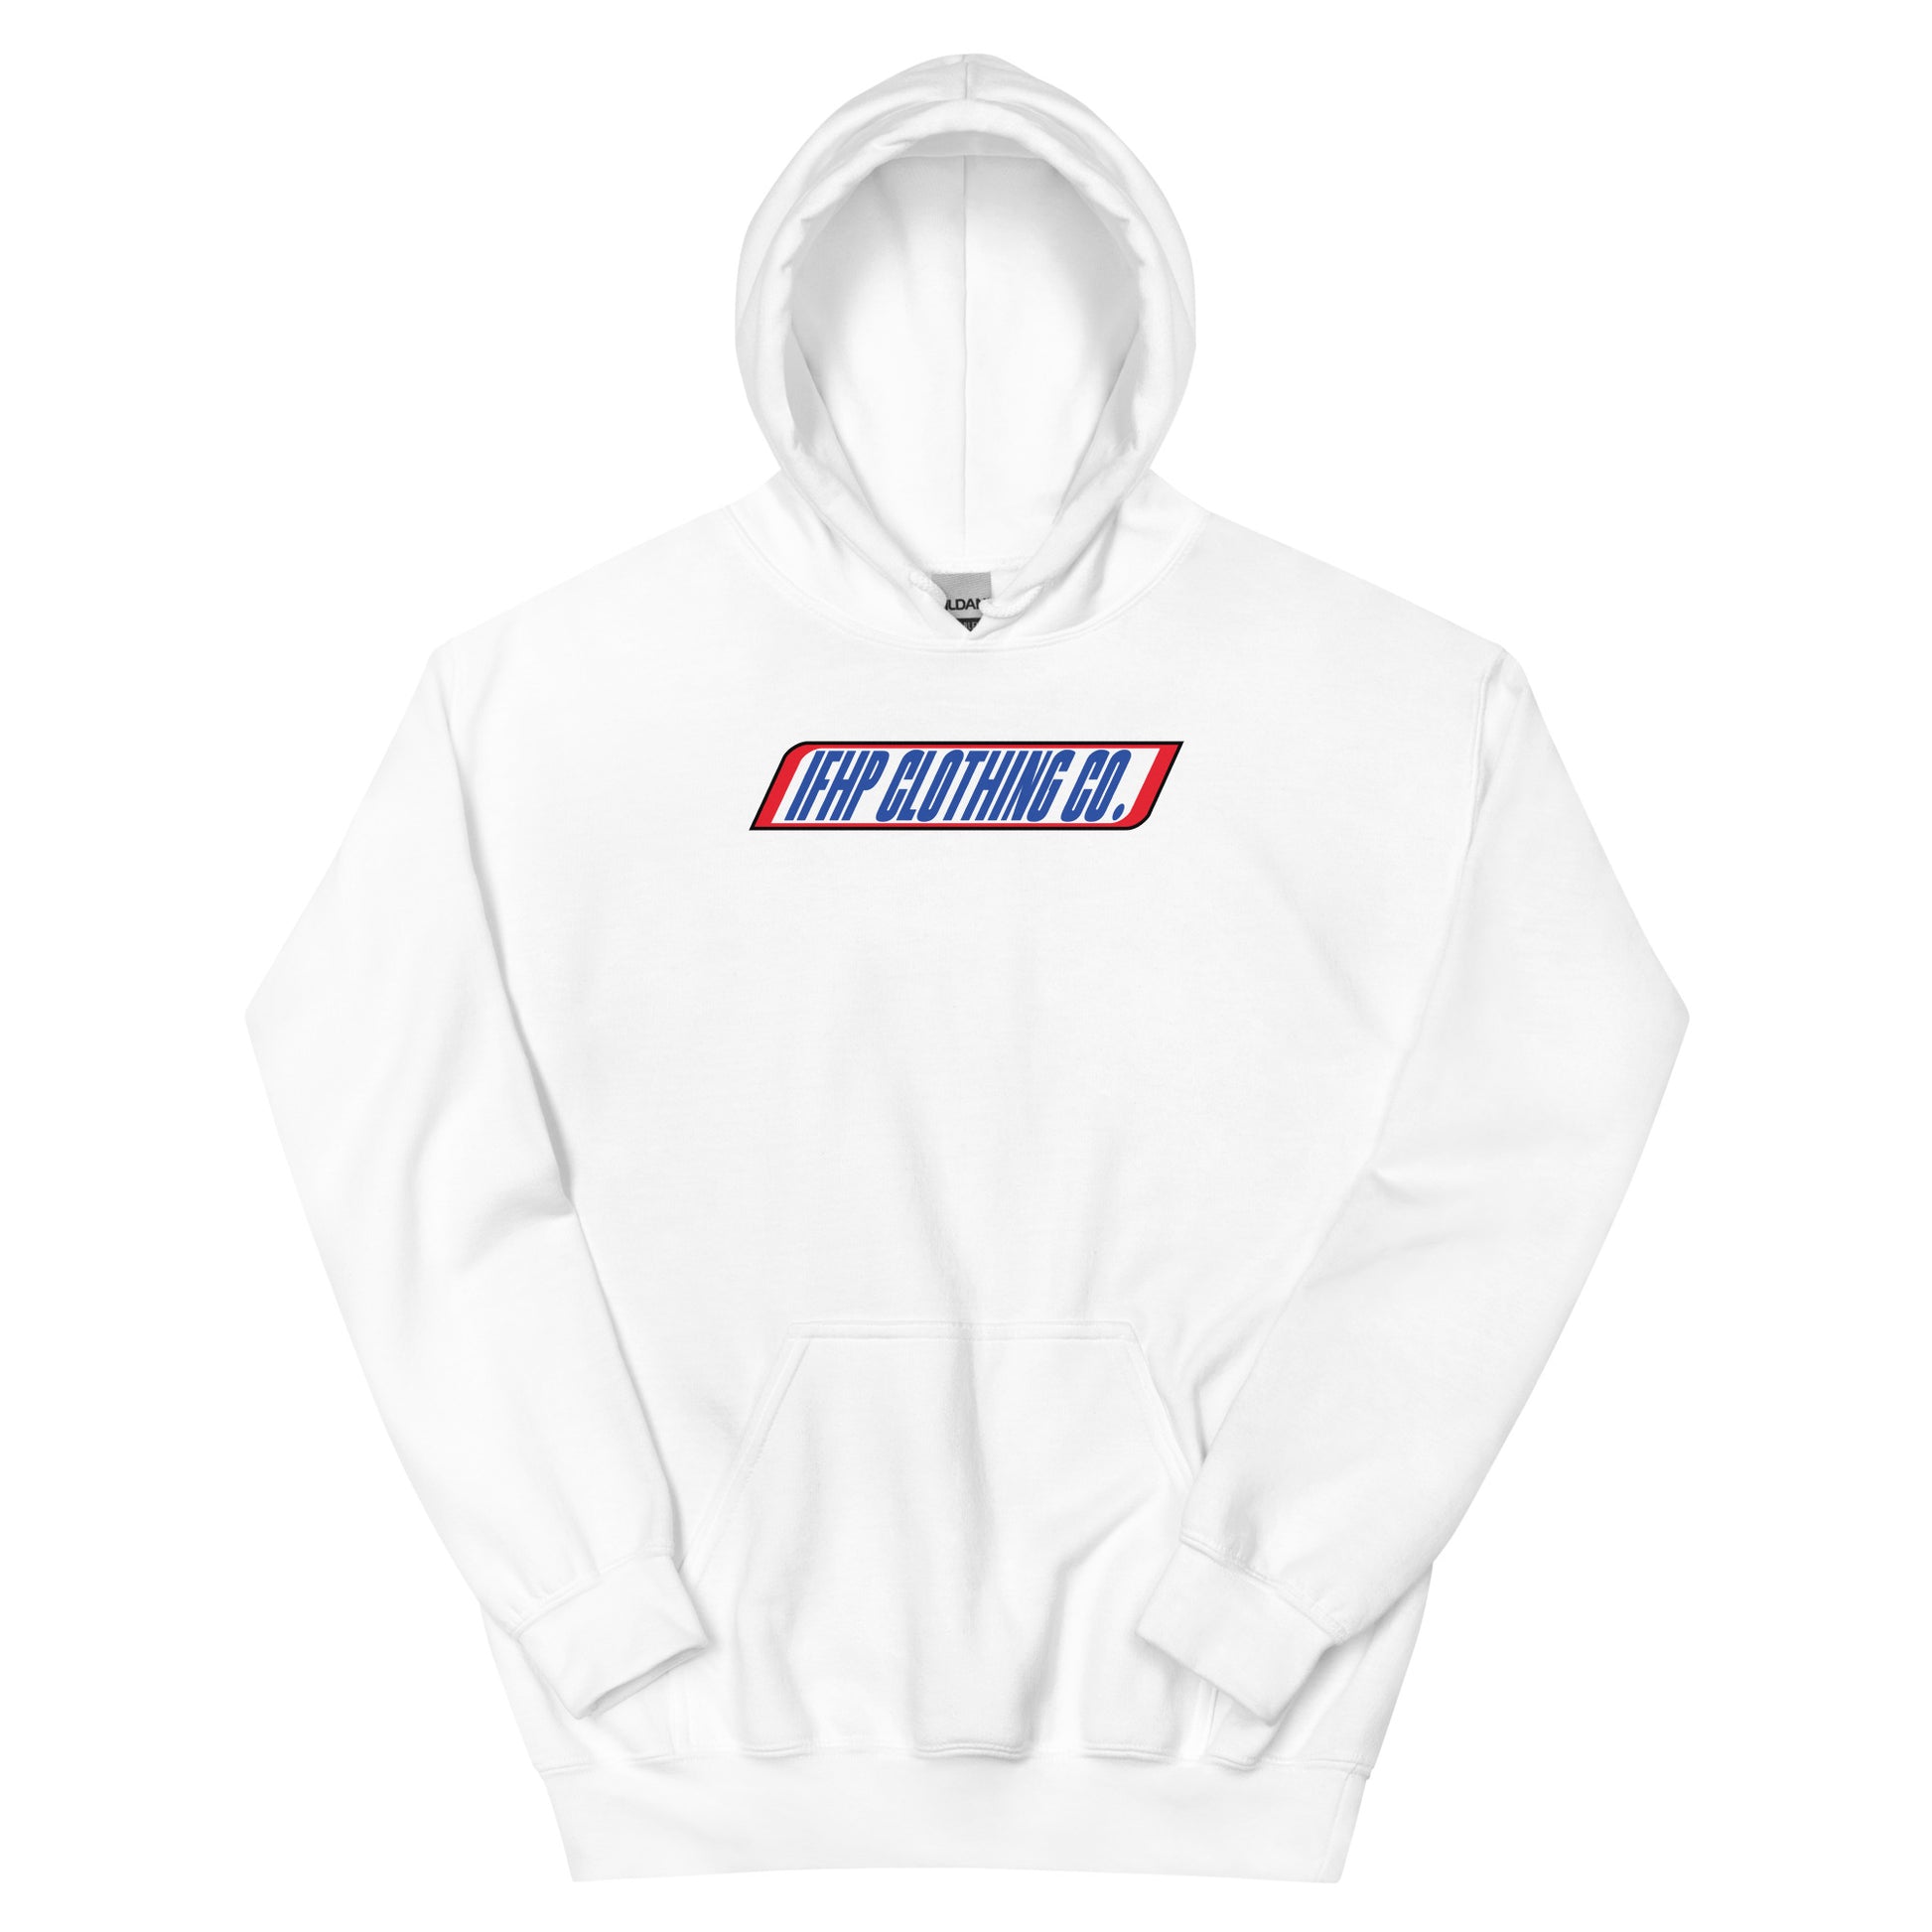 Who Doesn't Like Candy? Hoodie White Front